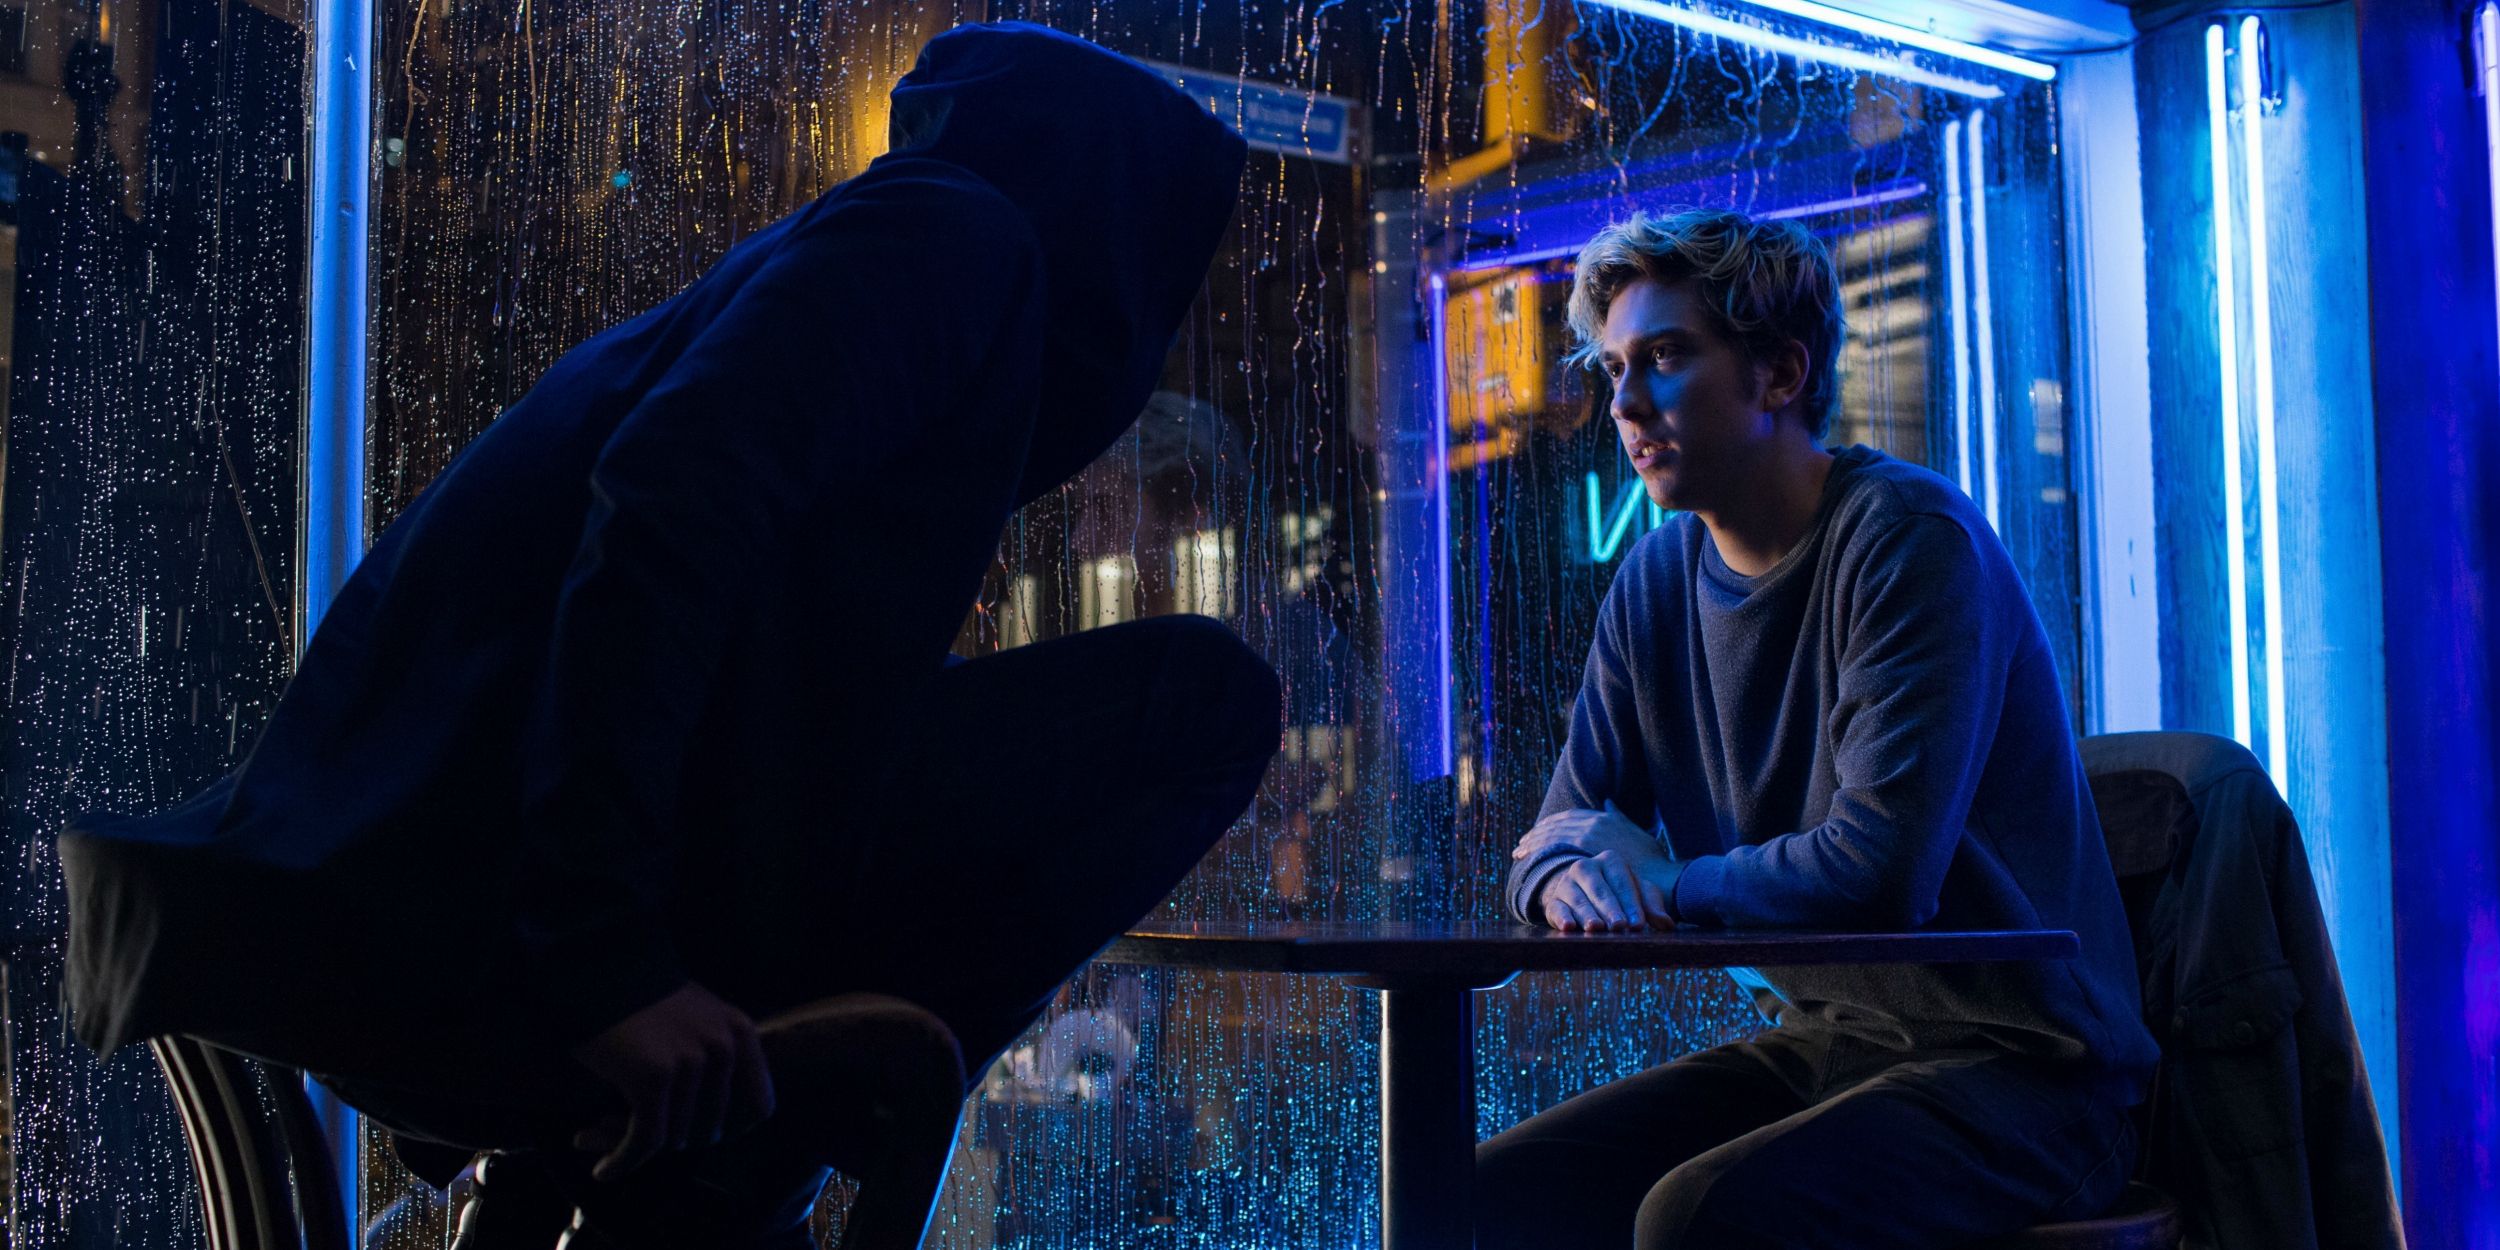 Why Netflixs Death Note Trailer Disappointed Fans